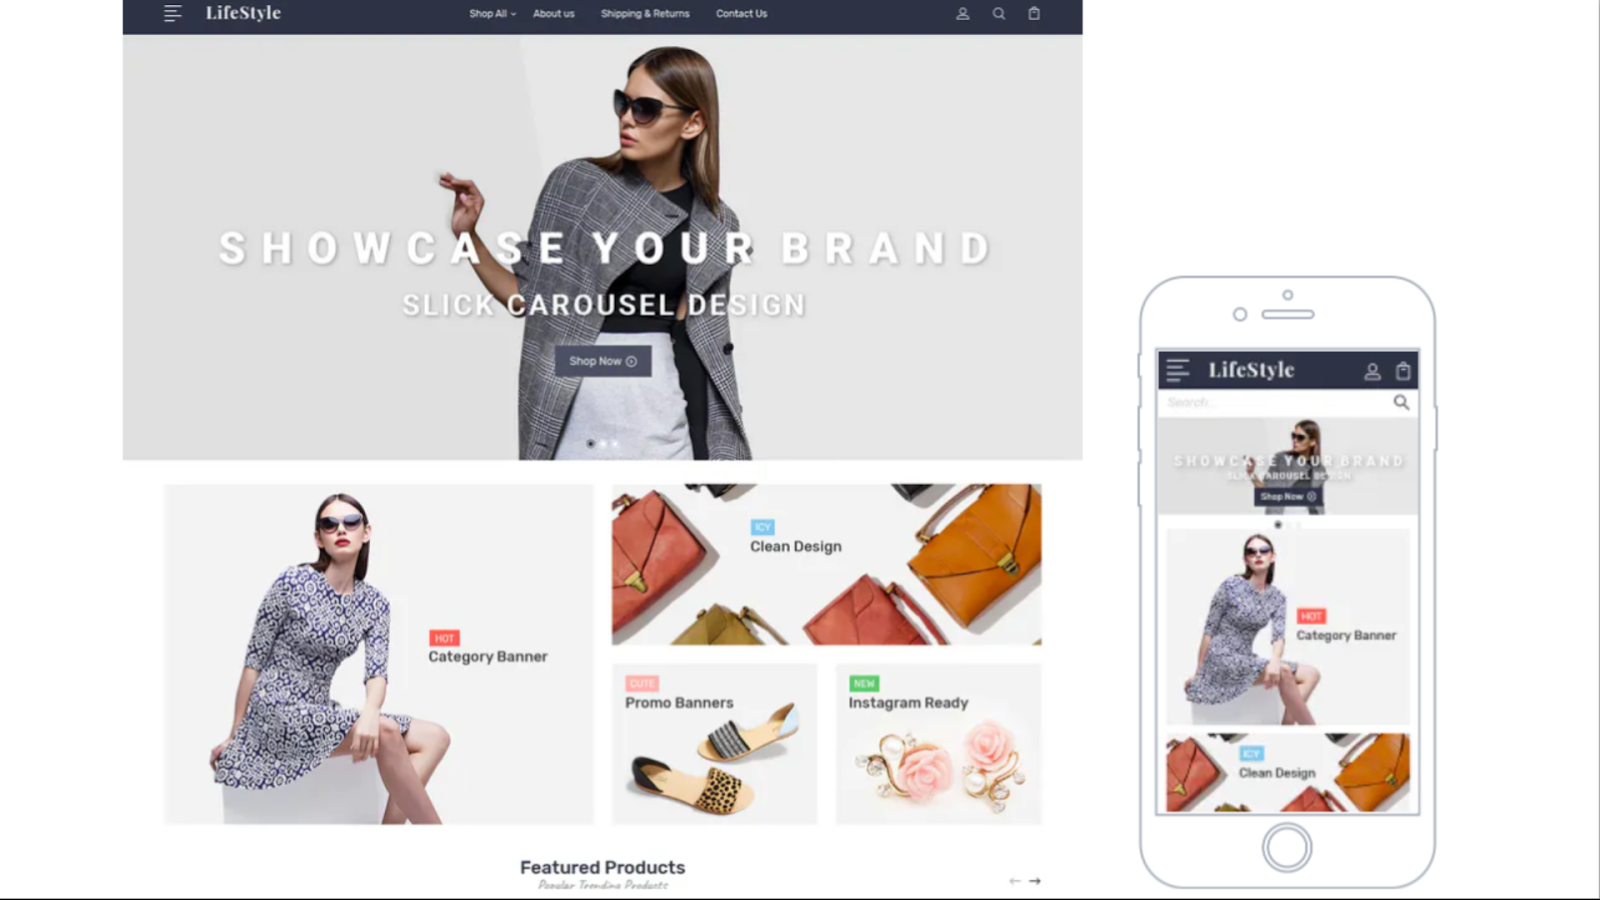 One of the free templates from BigCommerce as seen on both desktop and mobile, called